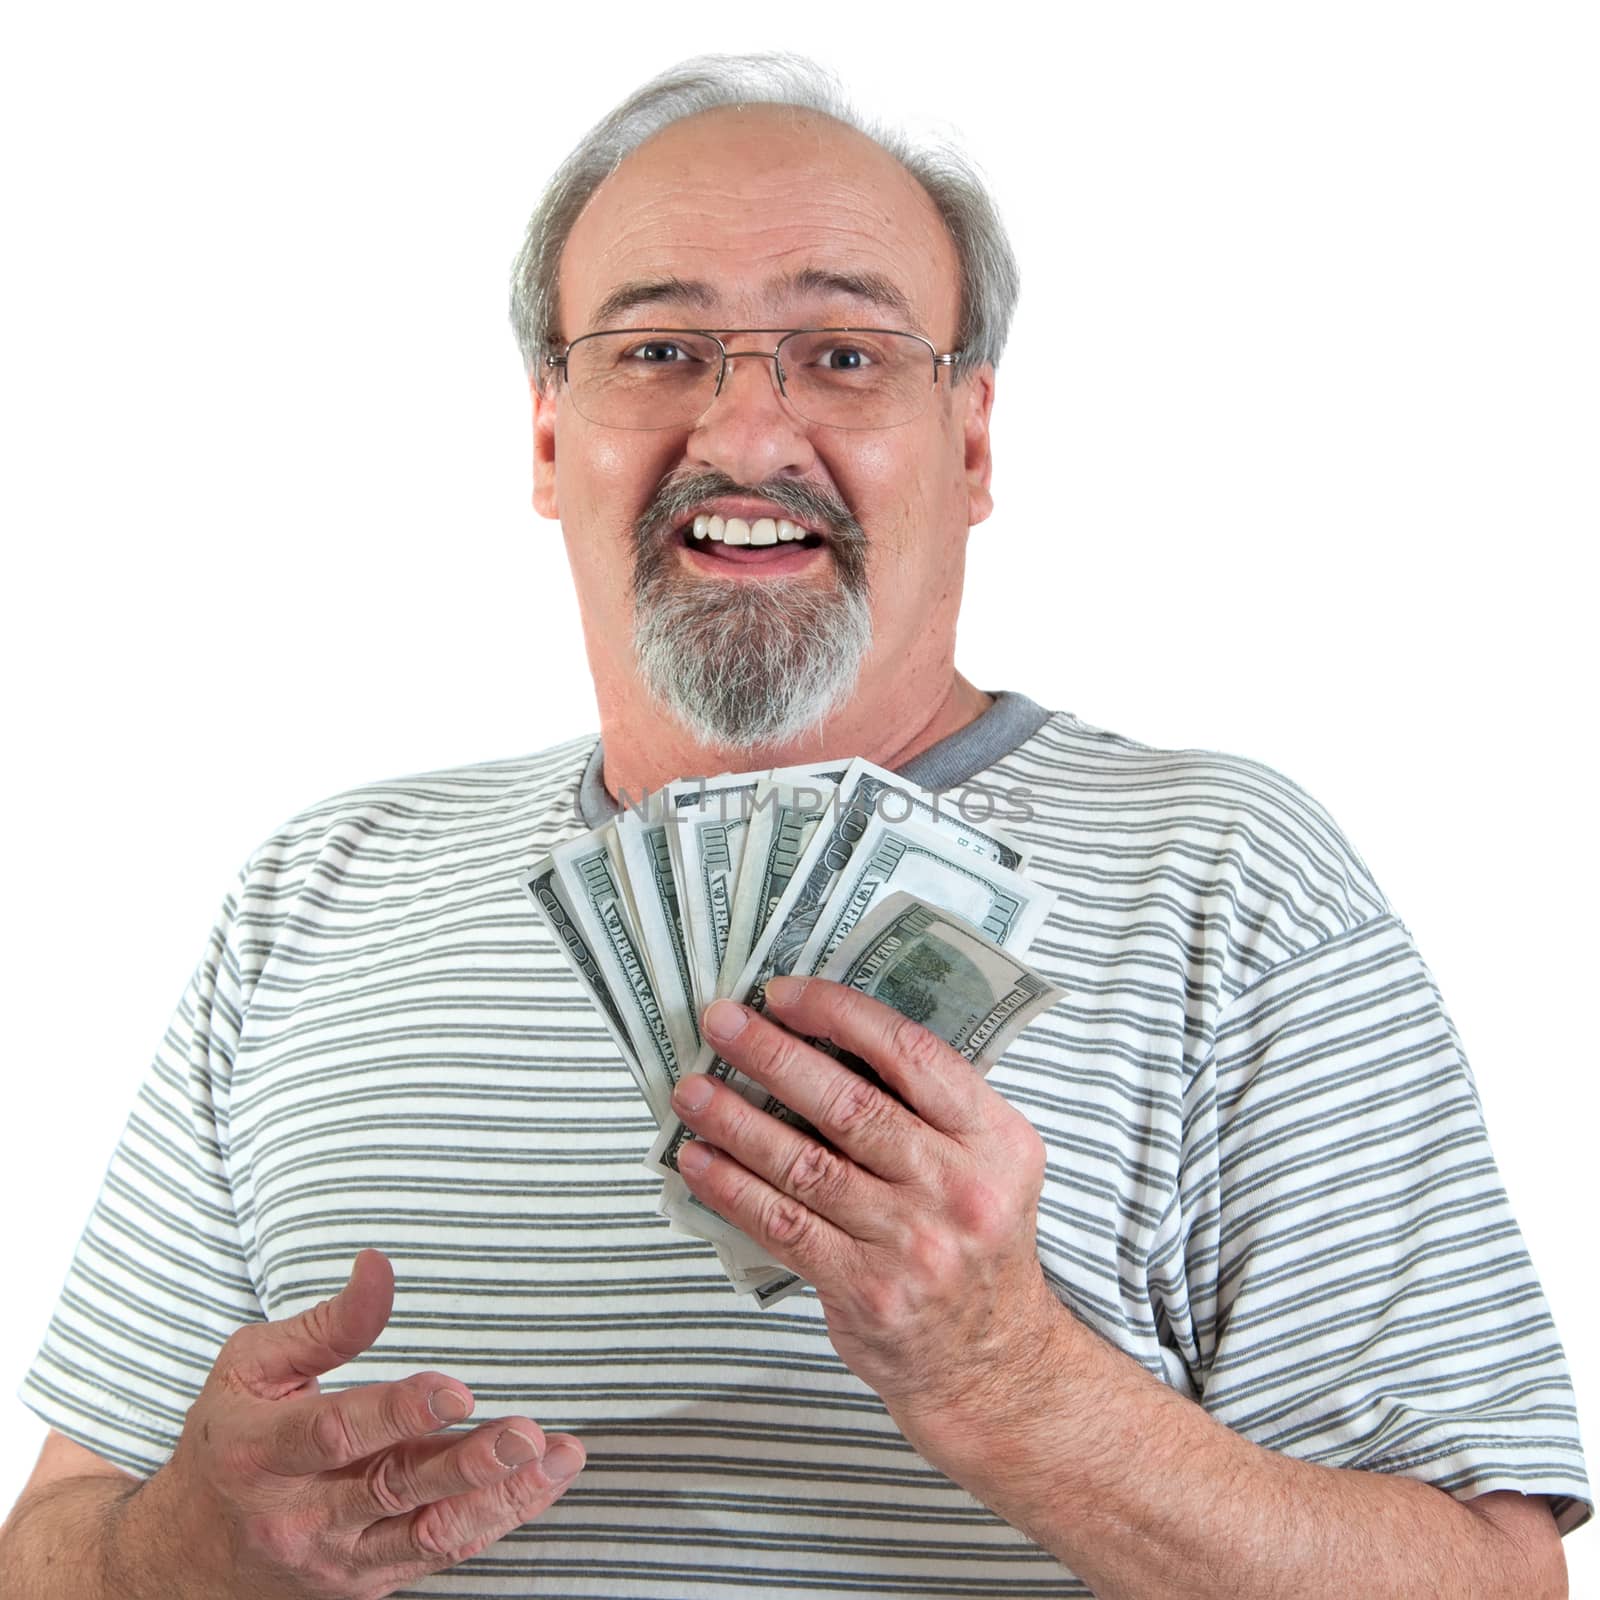 Mature man smiles while holding a handful of American hundred dollar bills. Isolated on a white background.